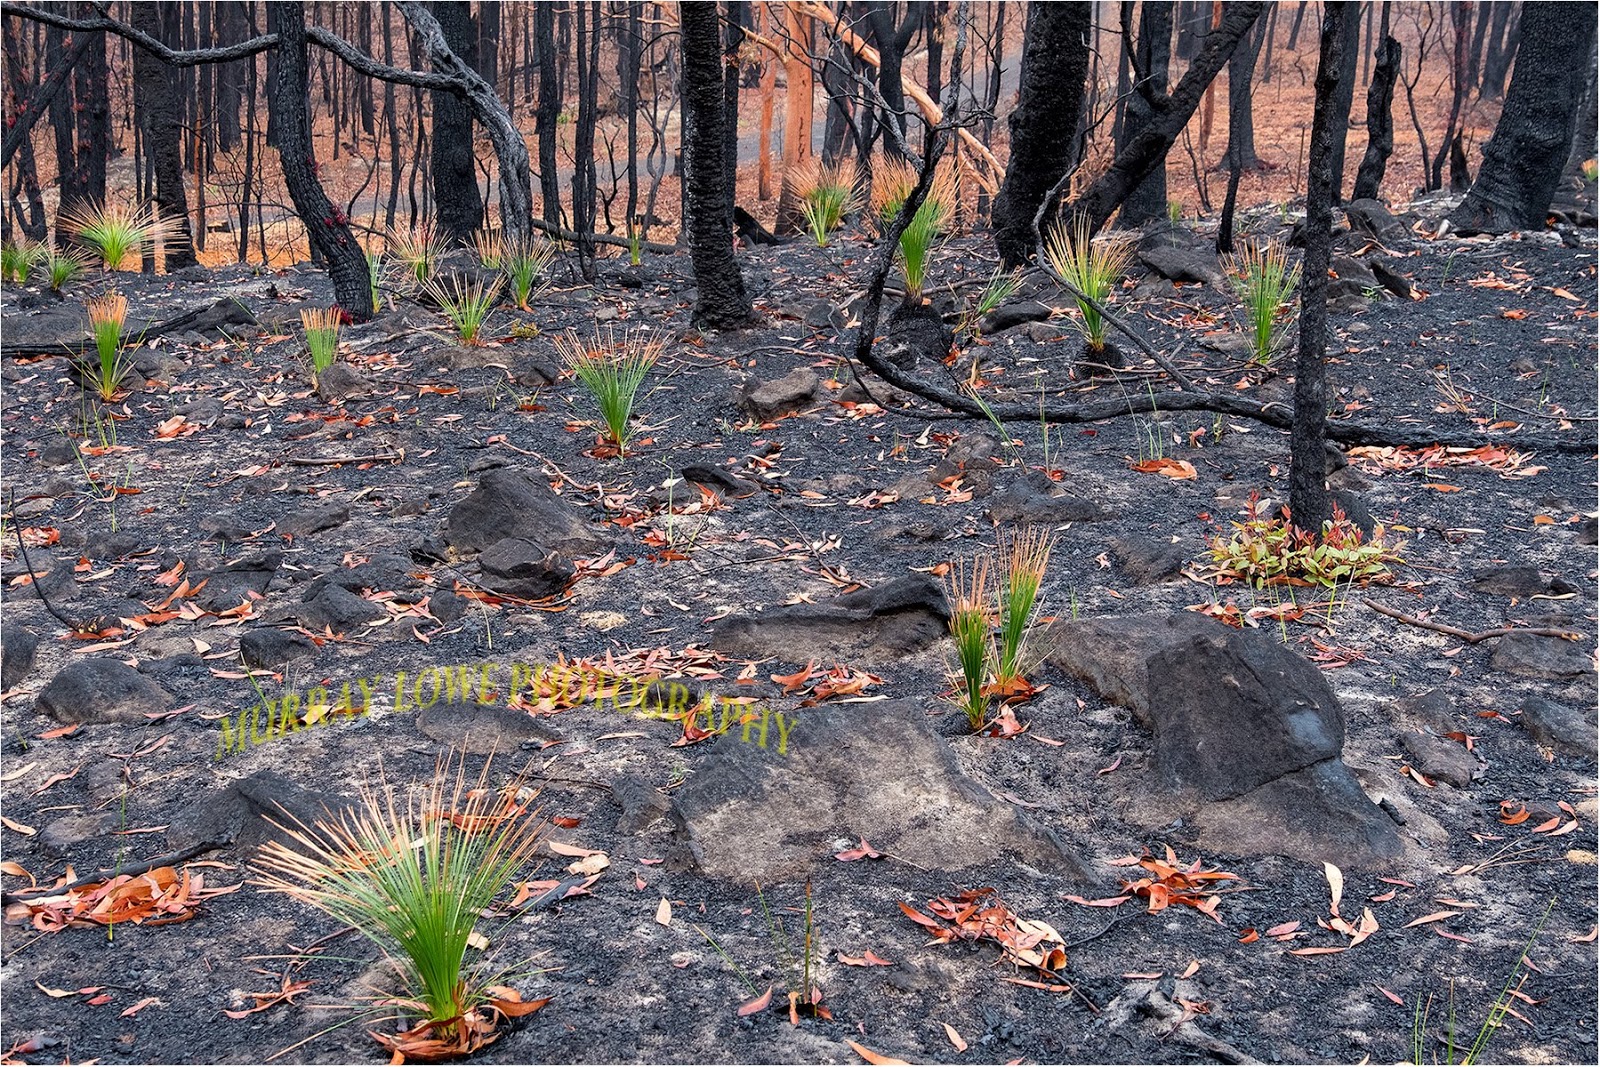 Heartwarming Pictures Of Plants Regrowing In Australia In Regions Devastated By The Blaze